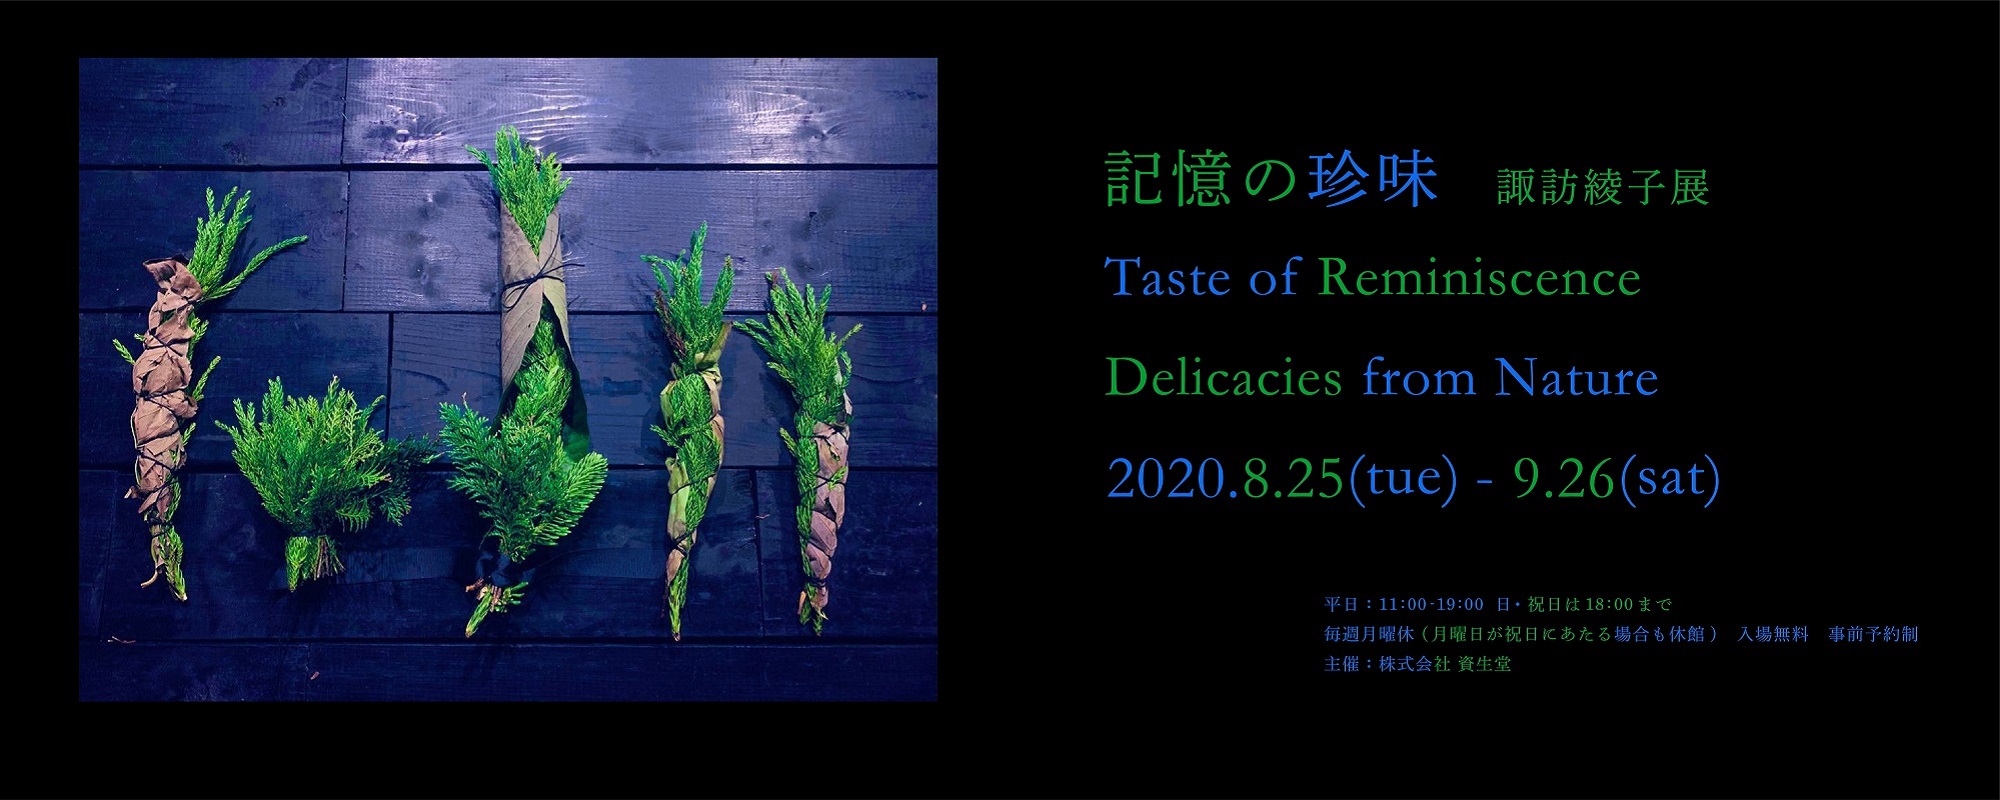 “Taste of Reminiscence, Delicacies from Nature: Ayako Suwa Exhibition”